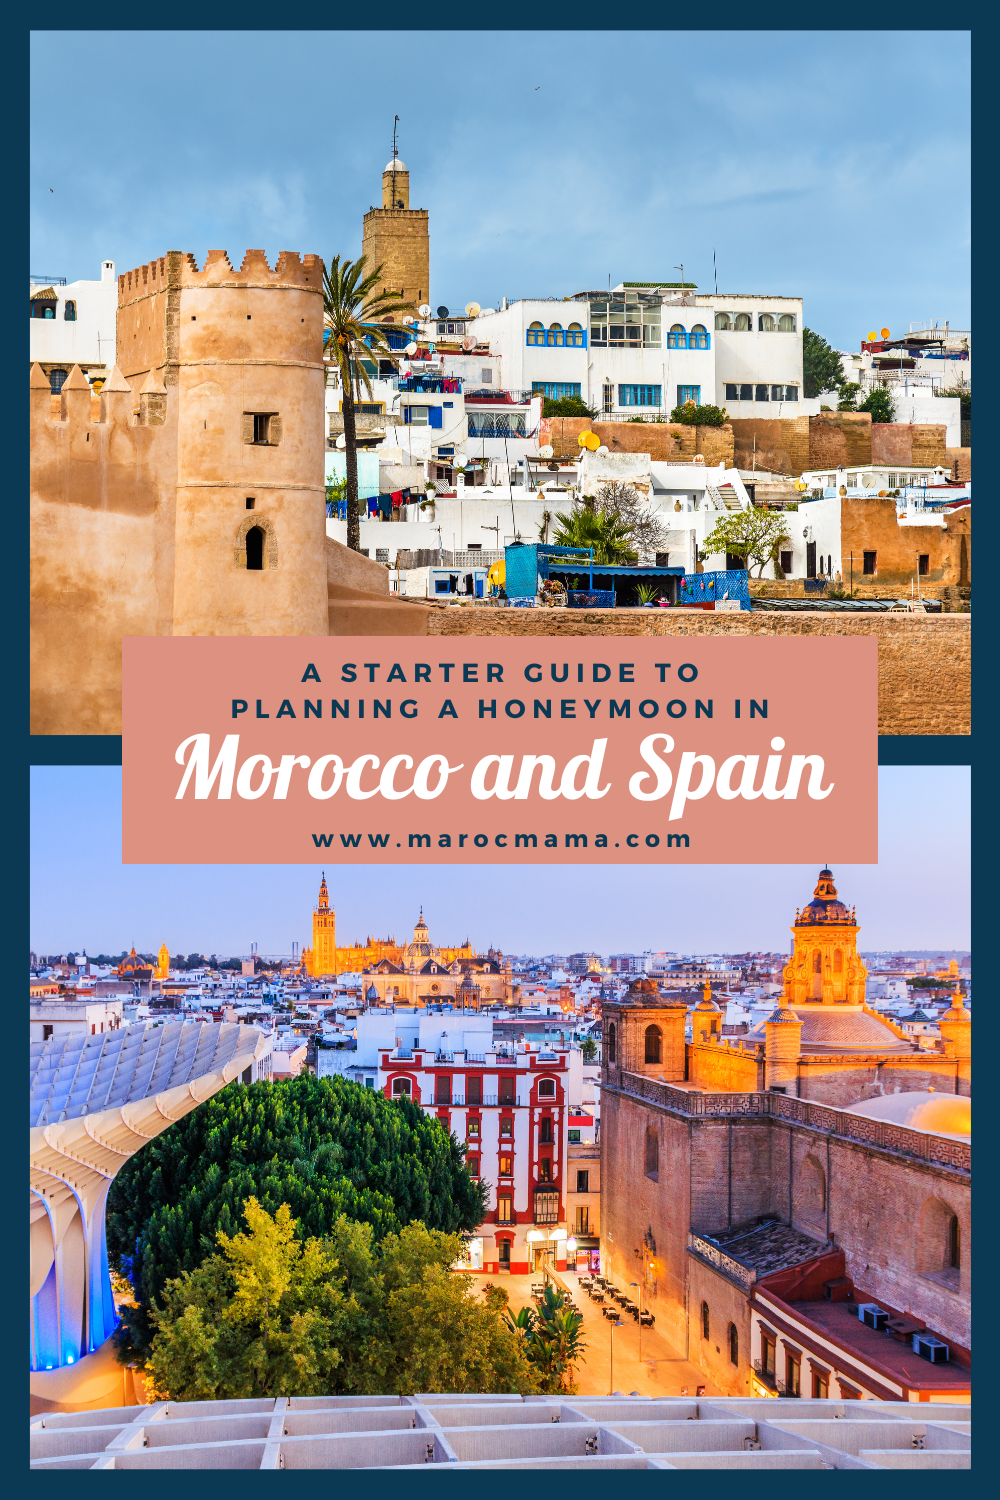 places to visit during honeymoon in Morocco and Spain